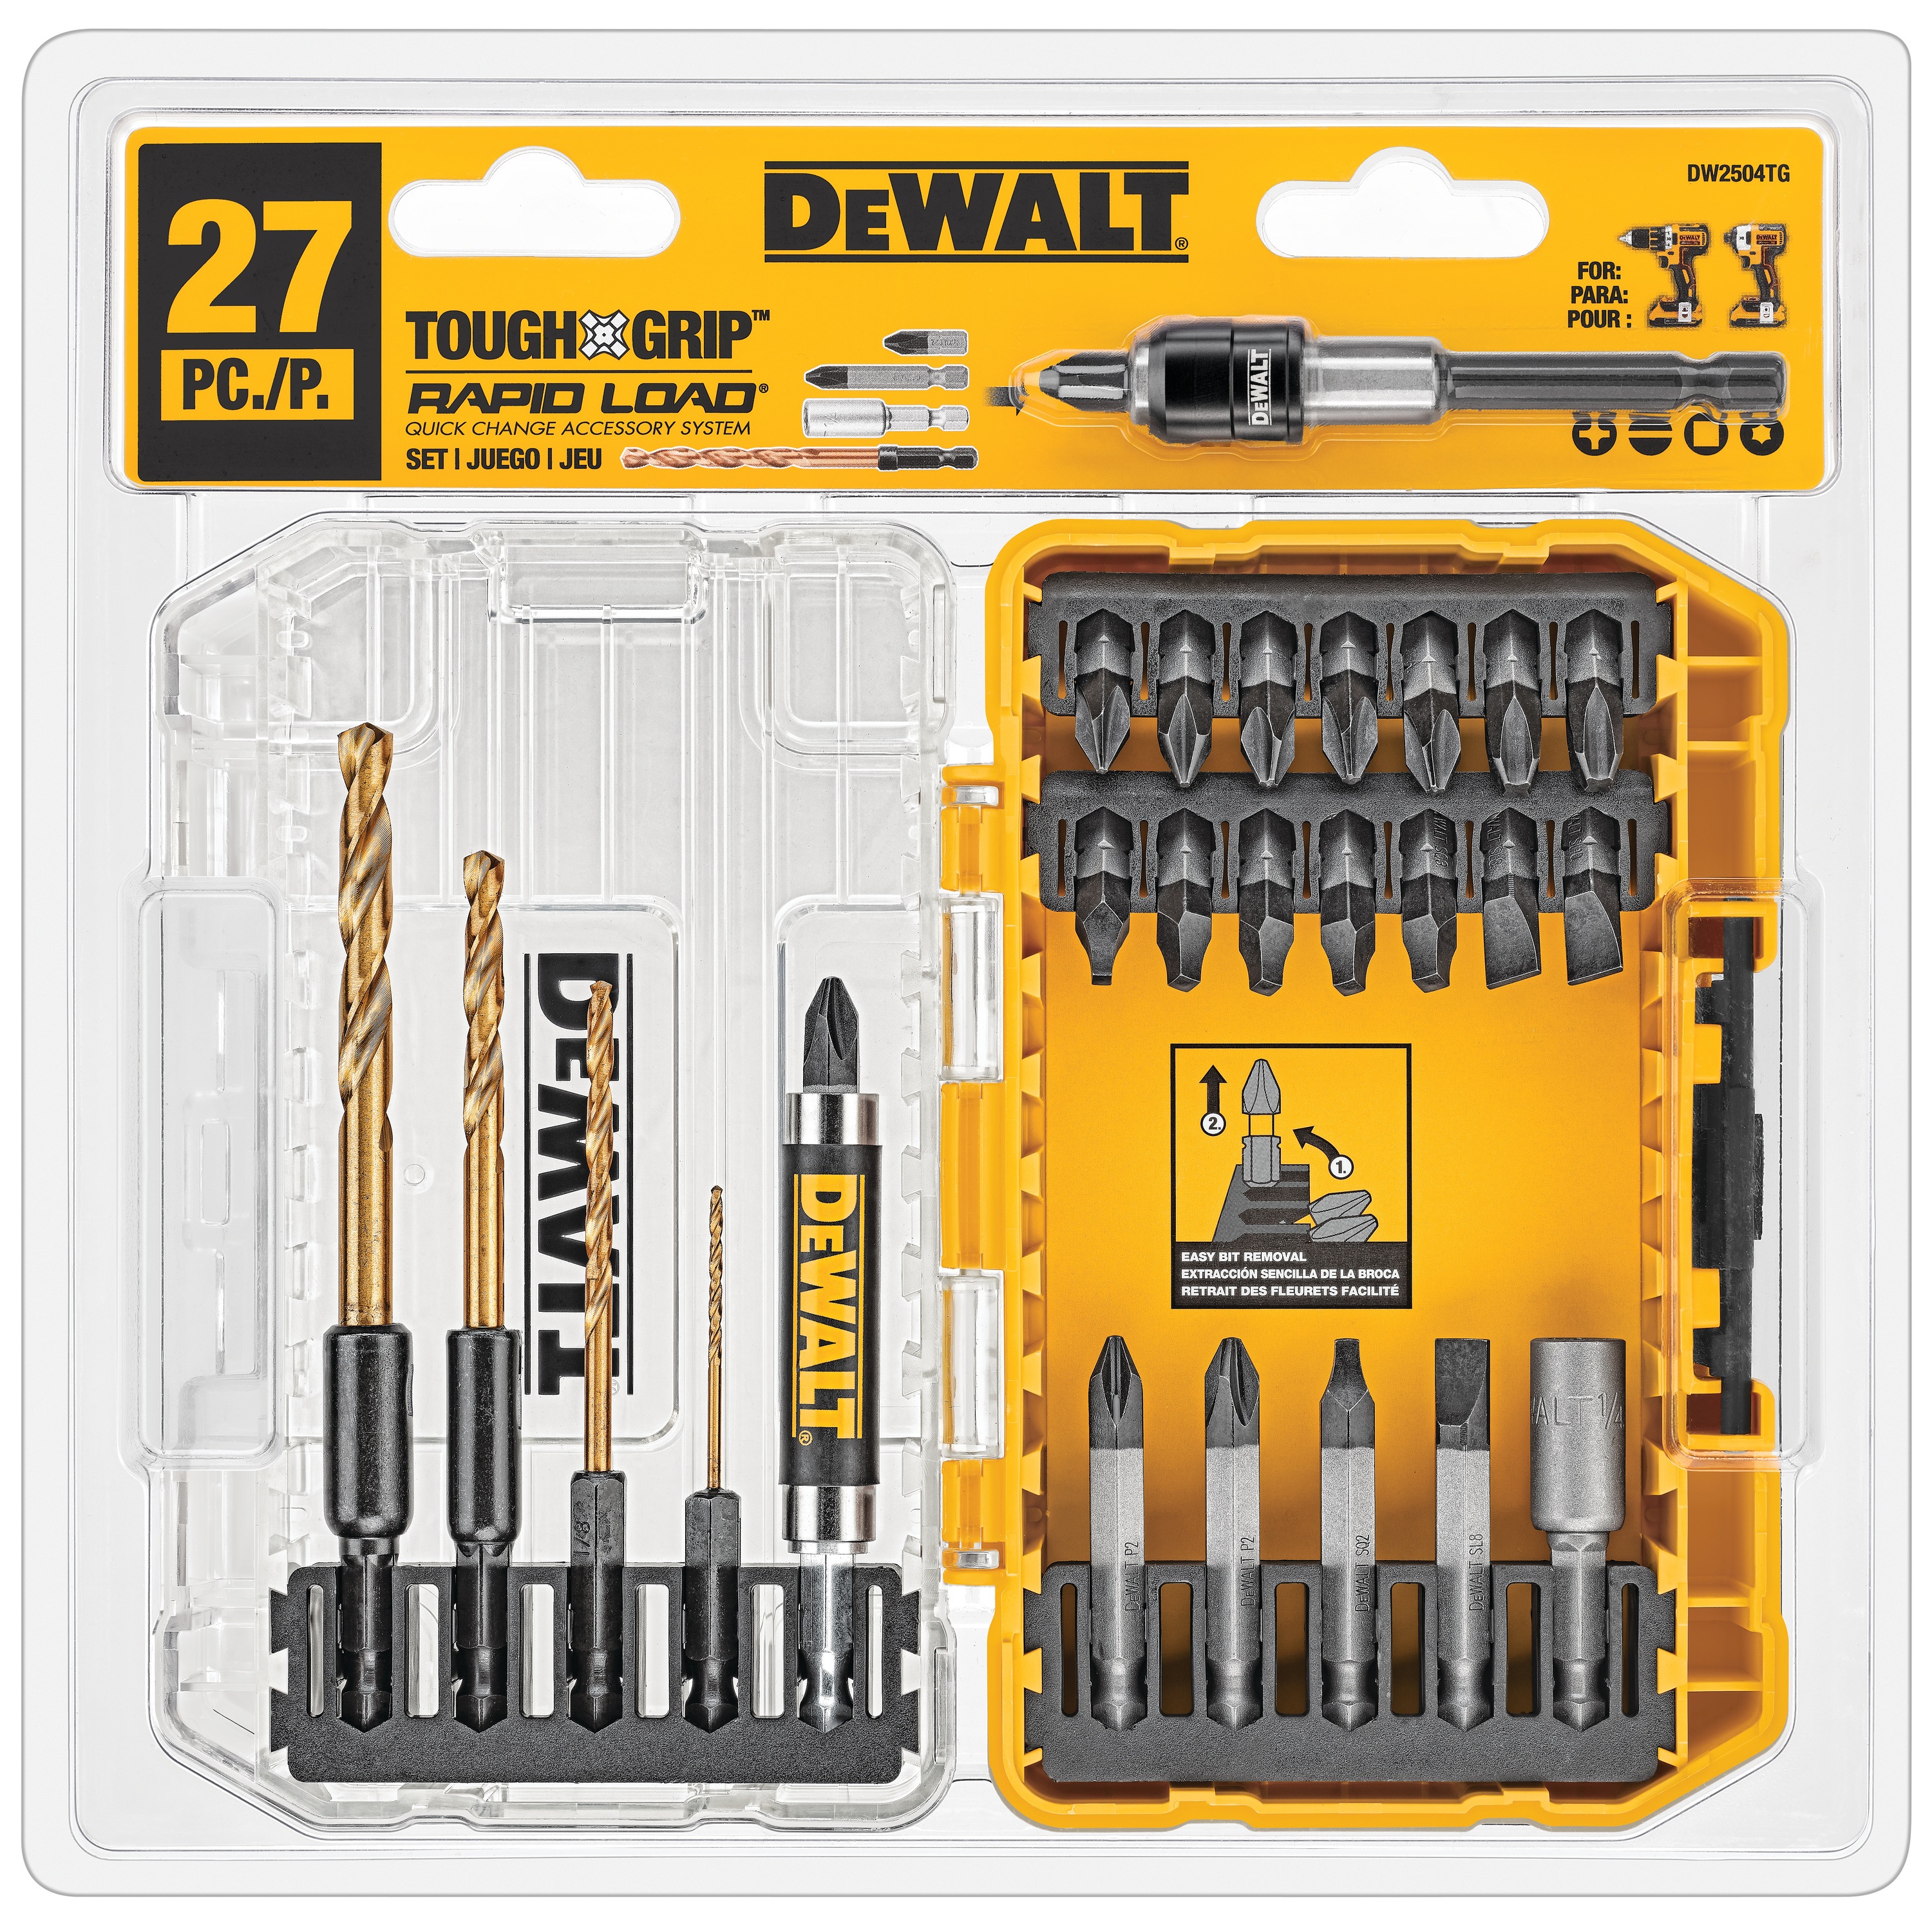 27 piece tough grip screwdriving bit sets with tough case plus system in plastic packaging.